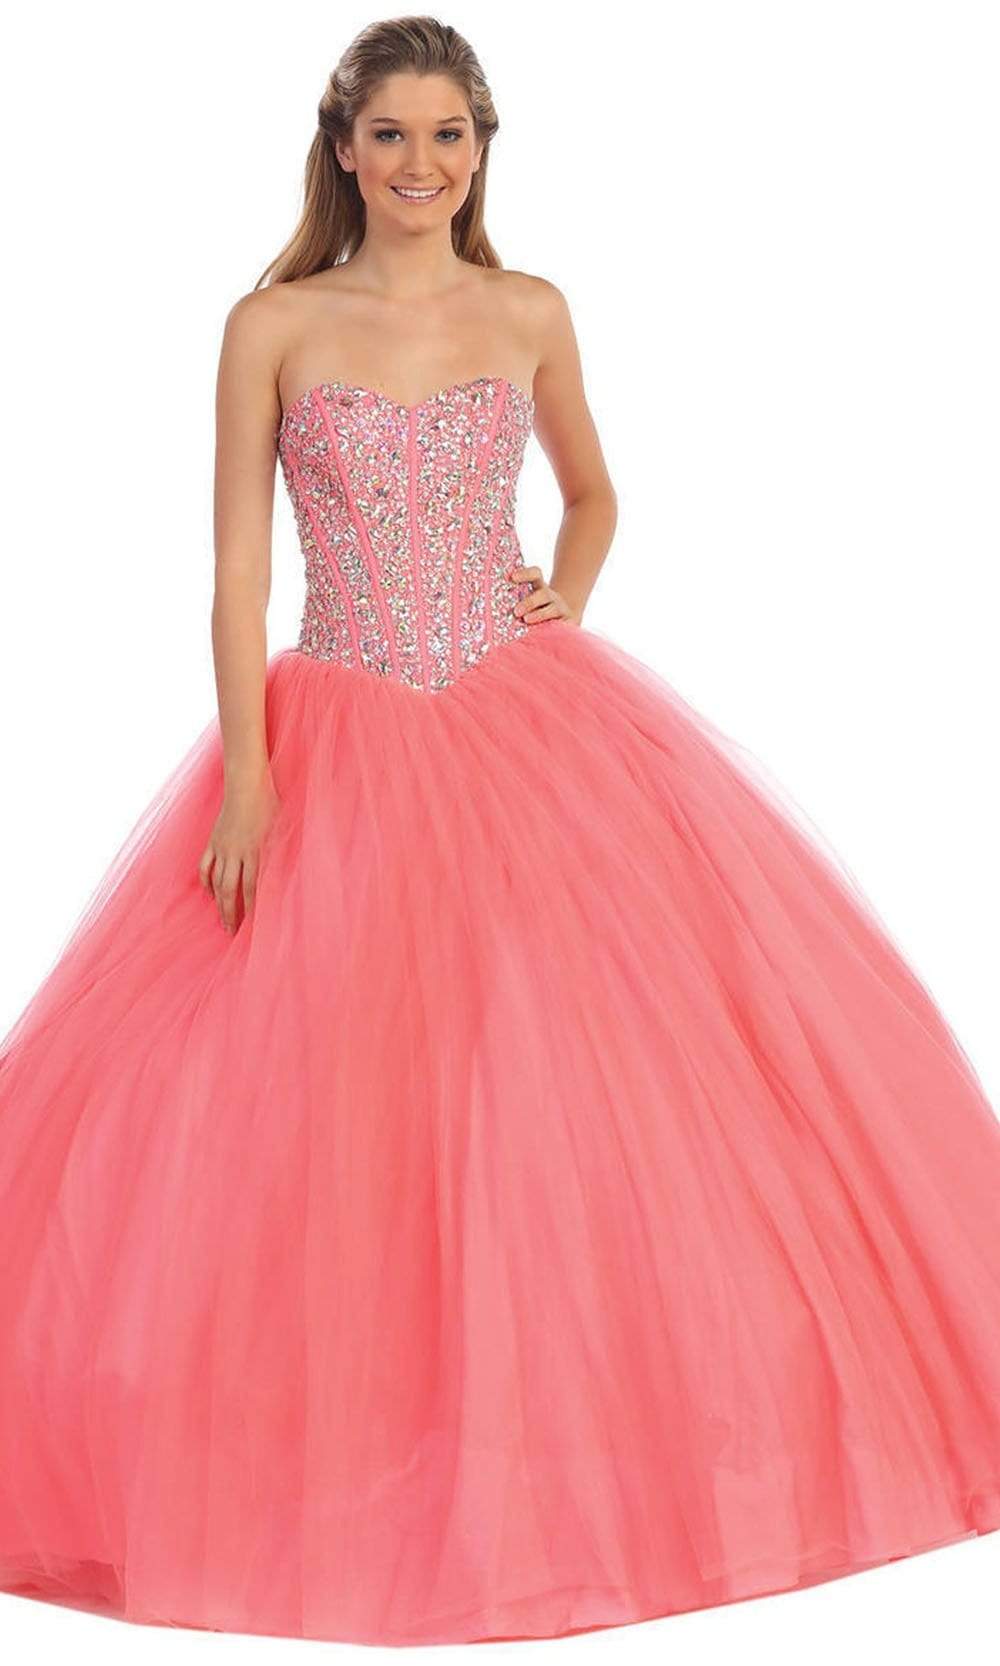 Dancing Queen - 9094 Embellished Sweetheart Evening Gown Special Occasion Dress